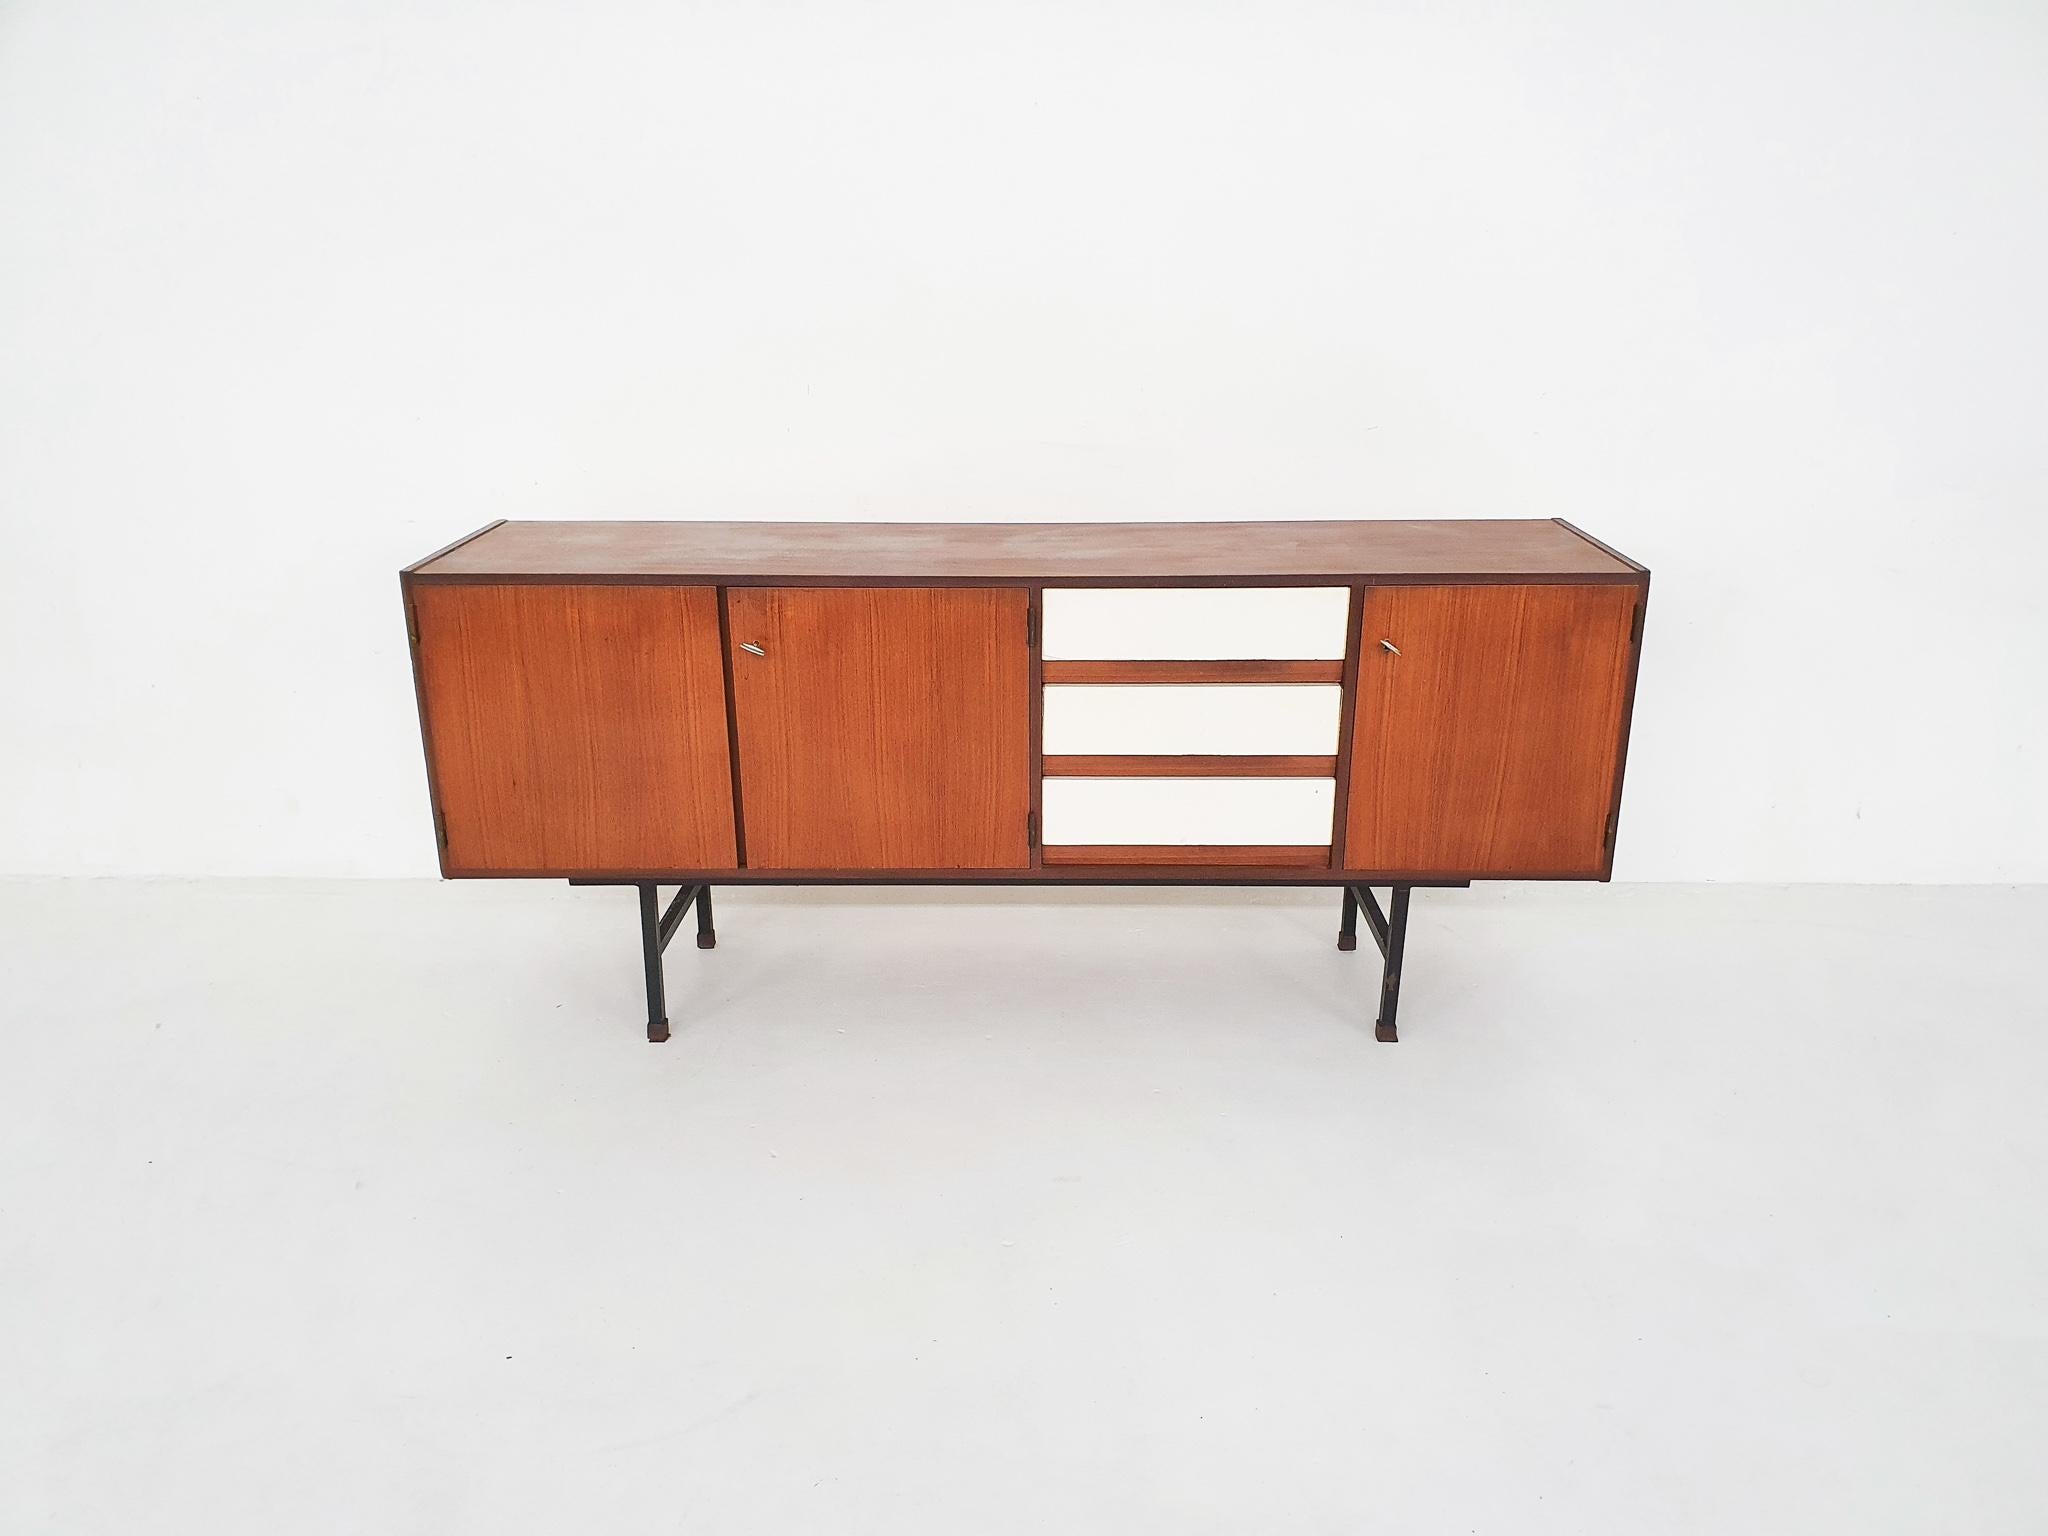 Dutch Mid-Century Modern Sideboard / Credenza by Coja, the Netherlands, 1960s